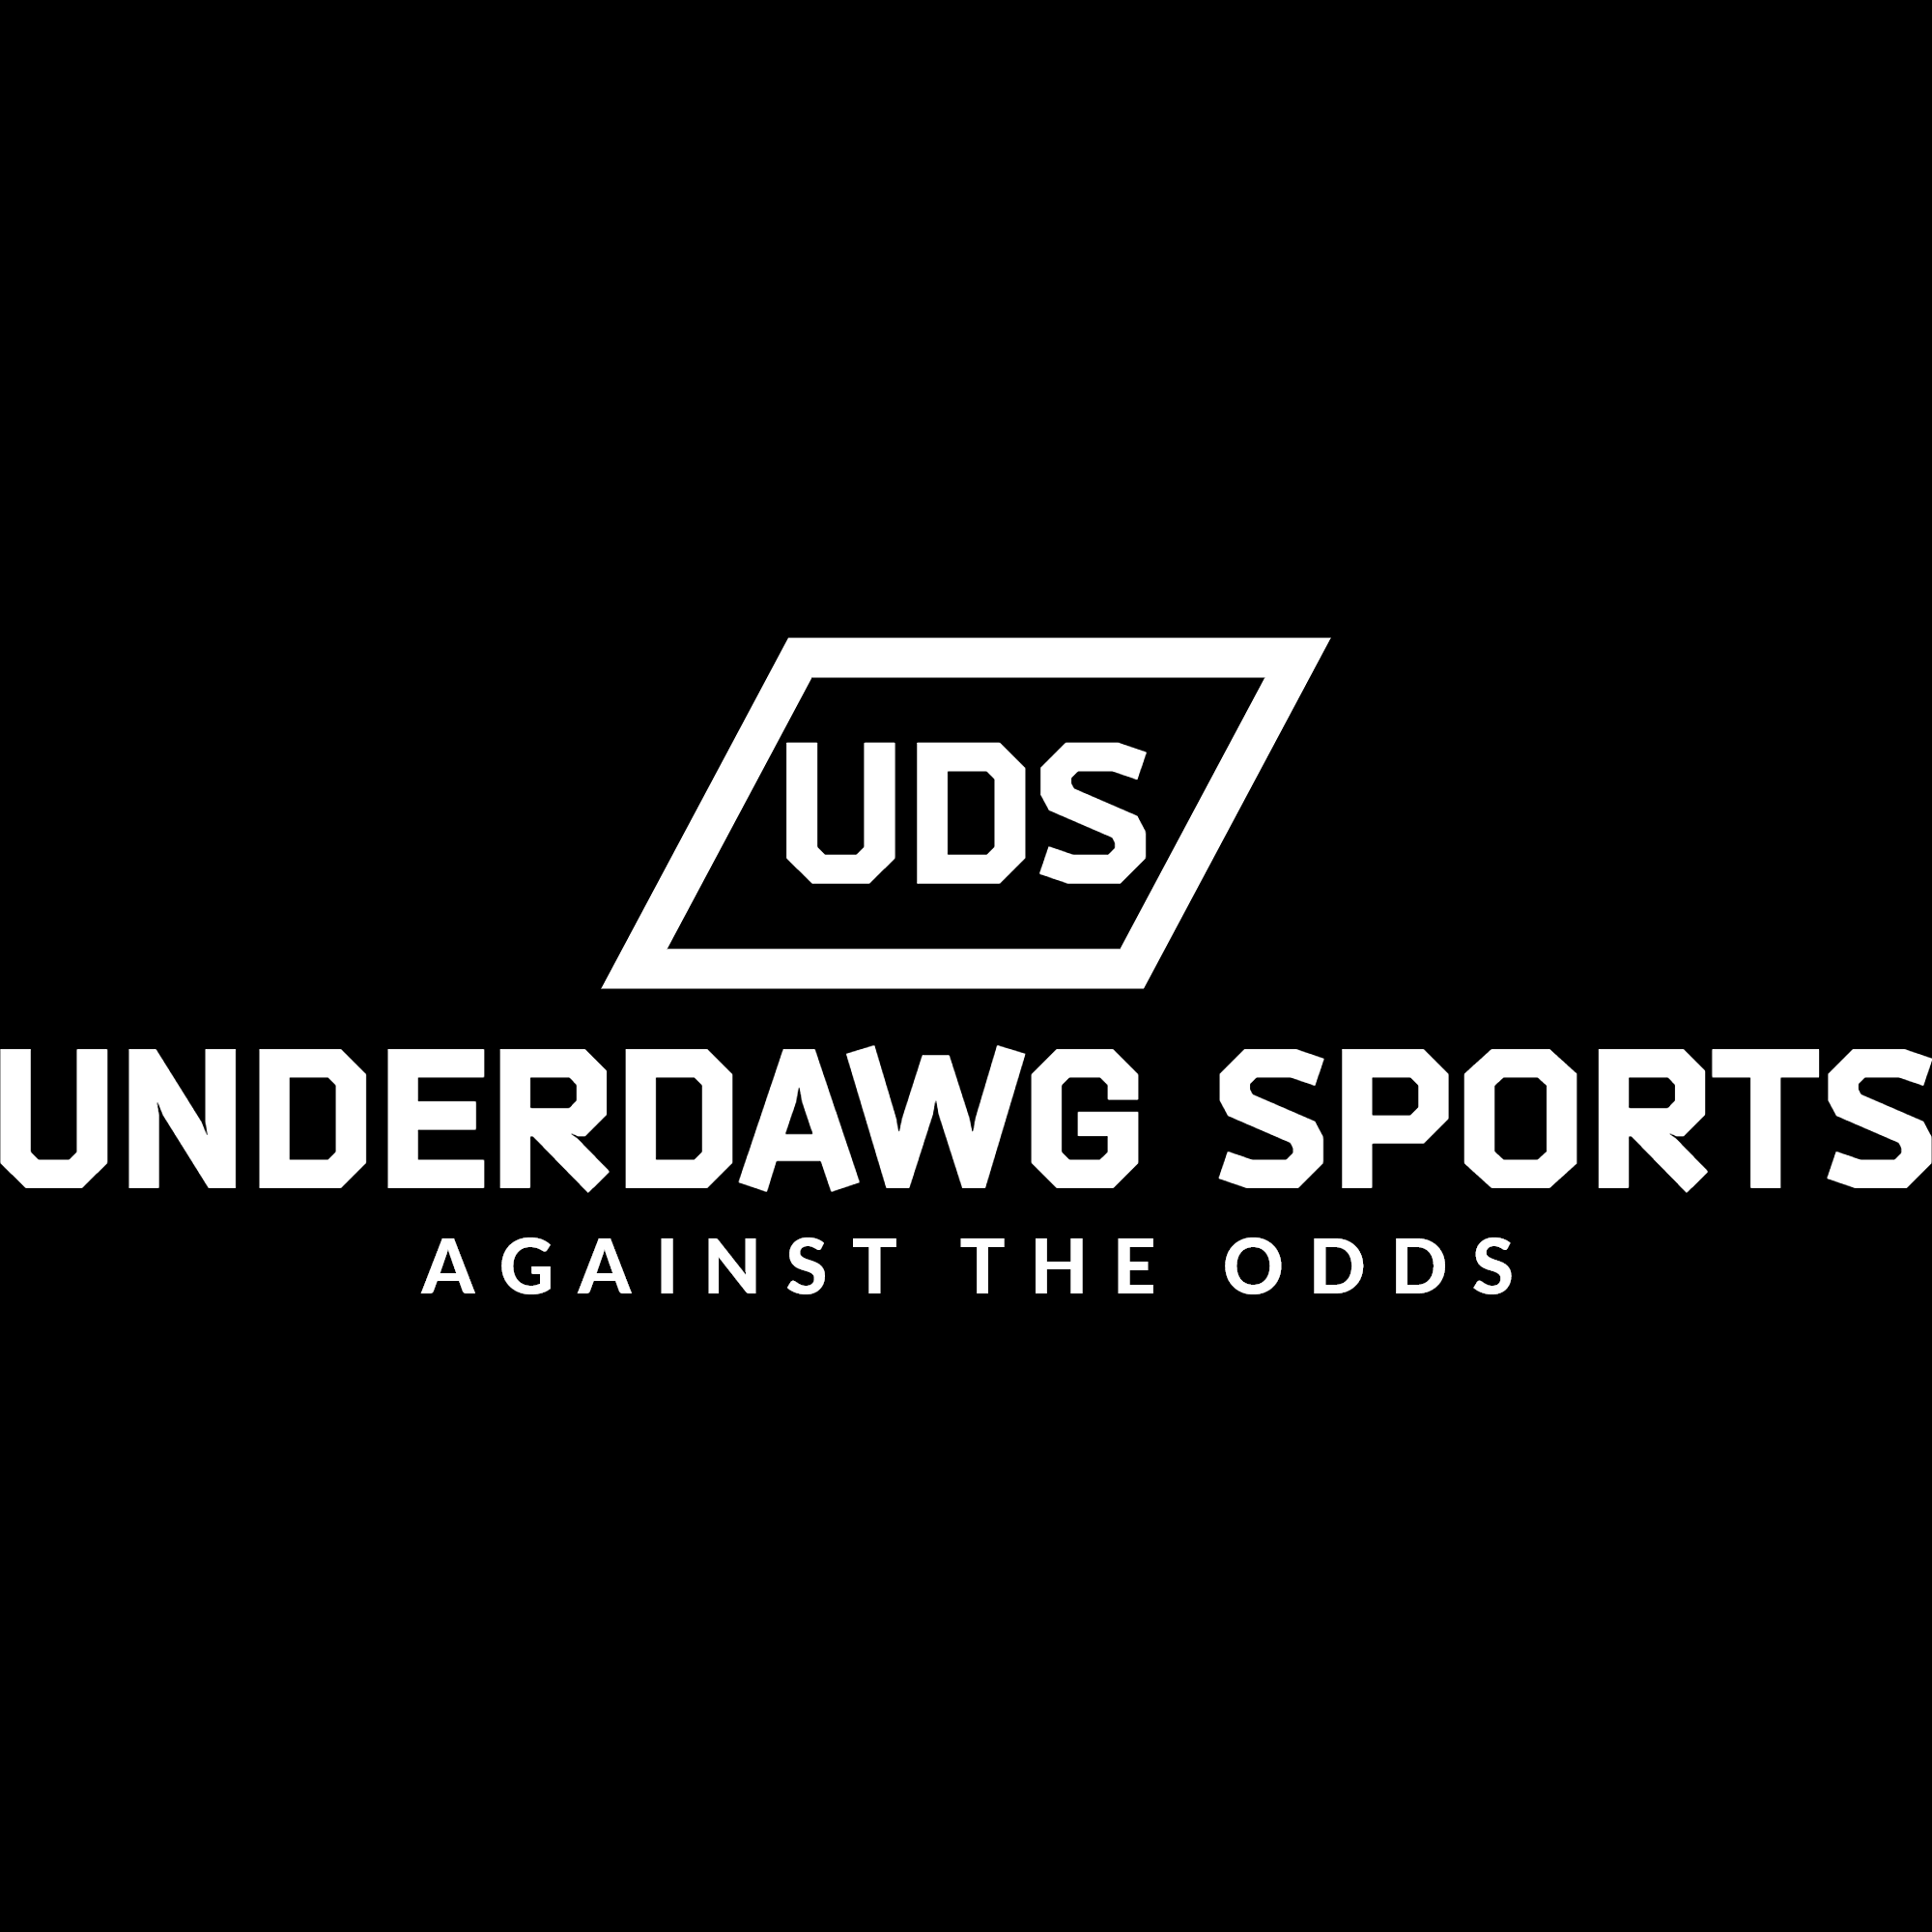 Artwork for Underdawg Sports